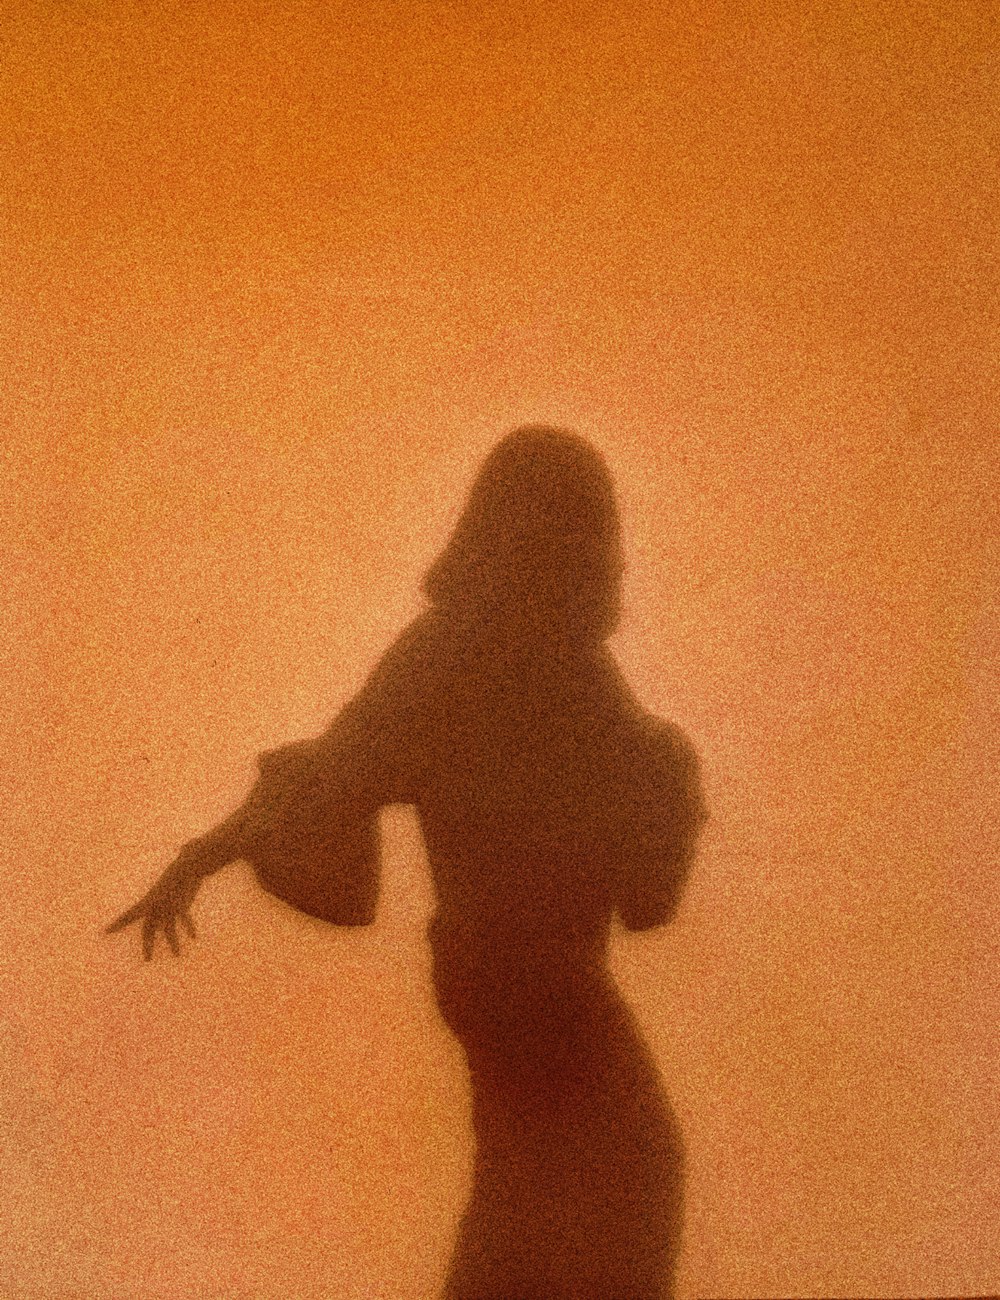 silhouette of person standing on brown sand